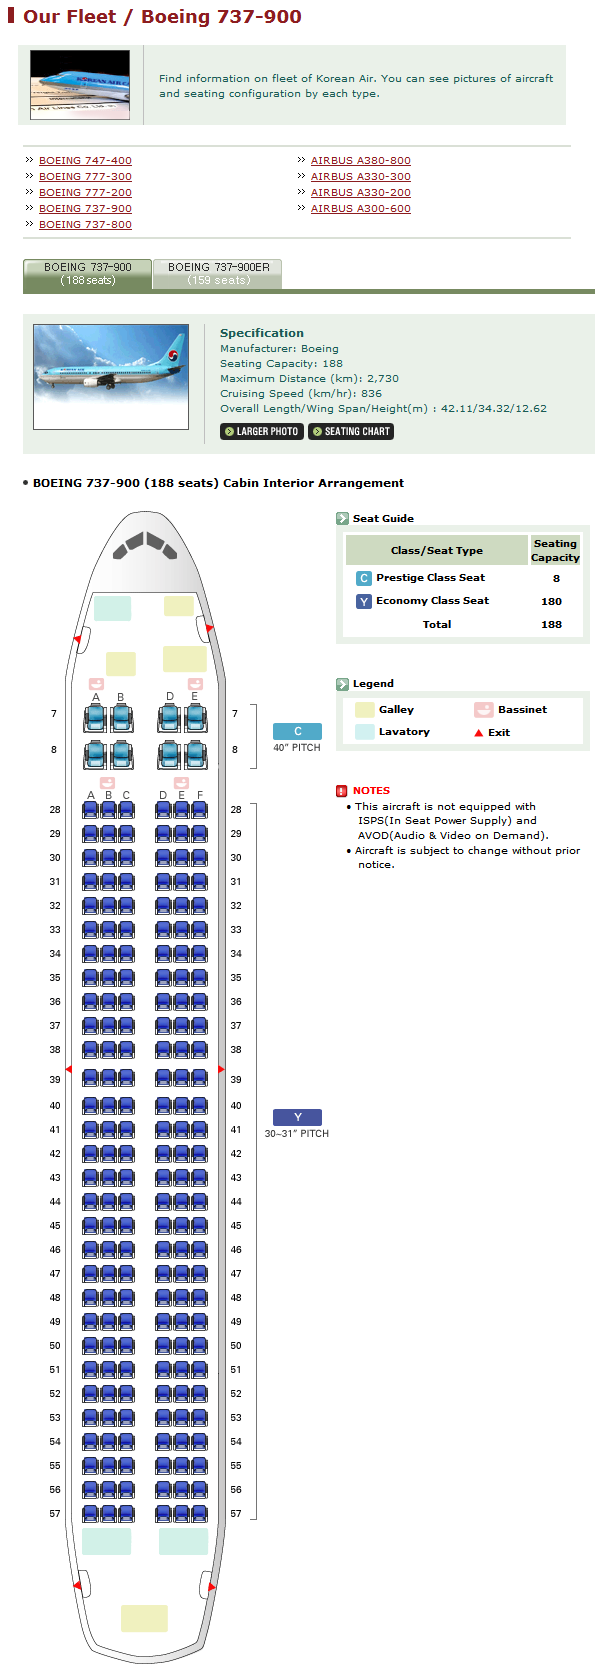 KOREAN AIR AIRLINES BOEING 737-900 AIRCRAFT SEATING CHART